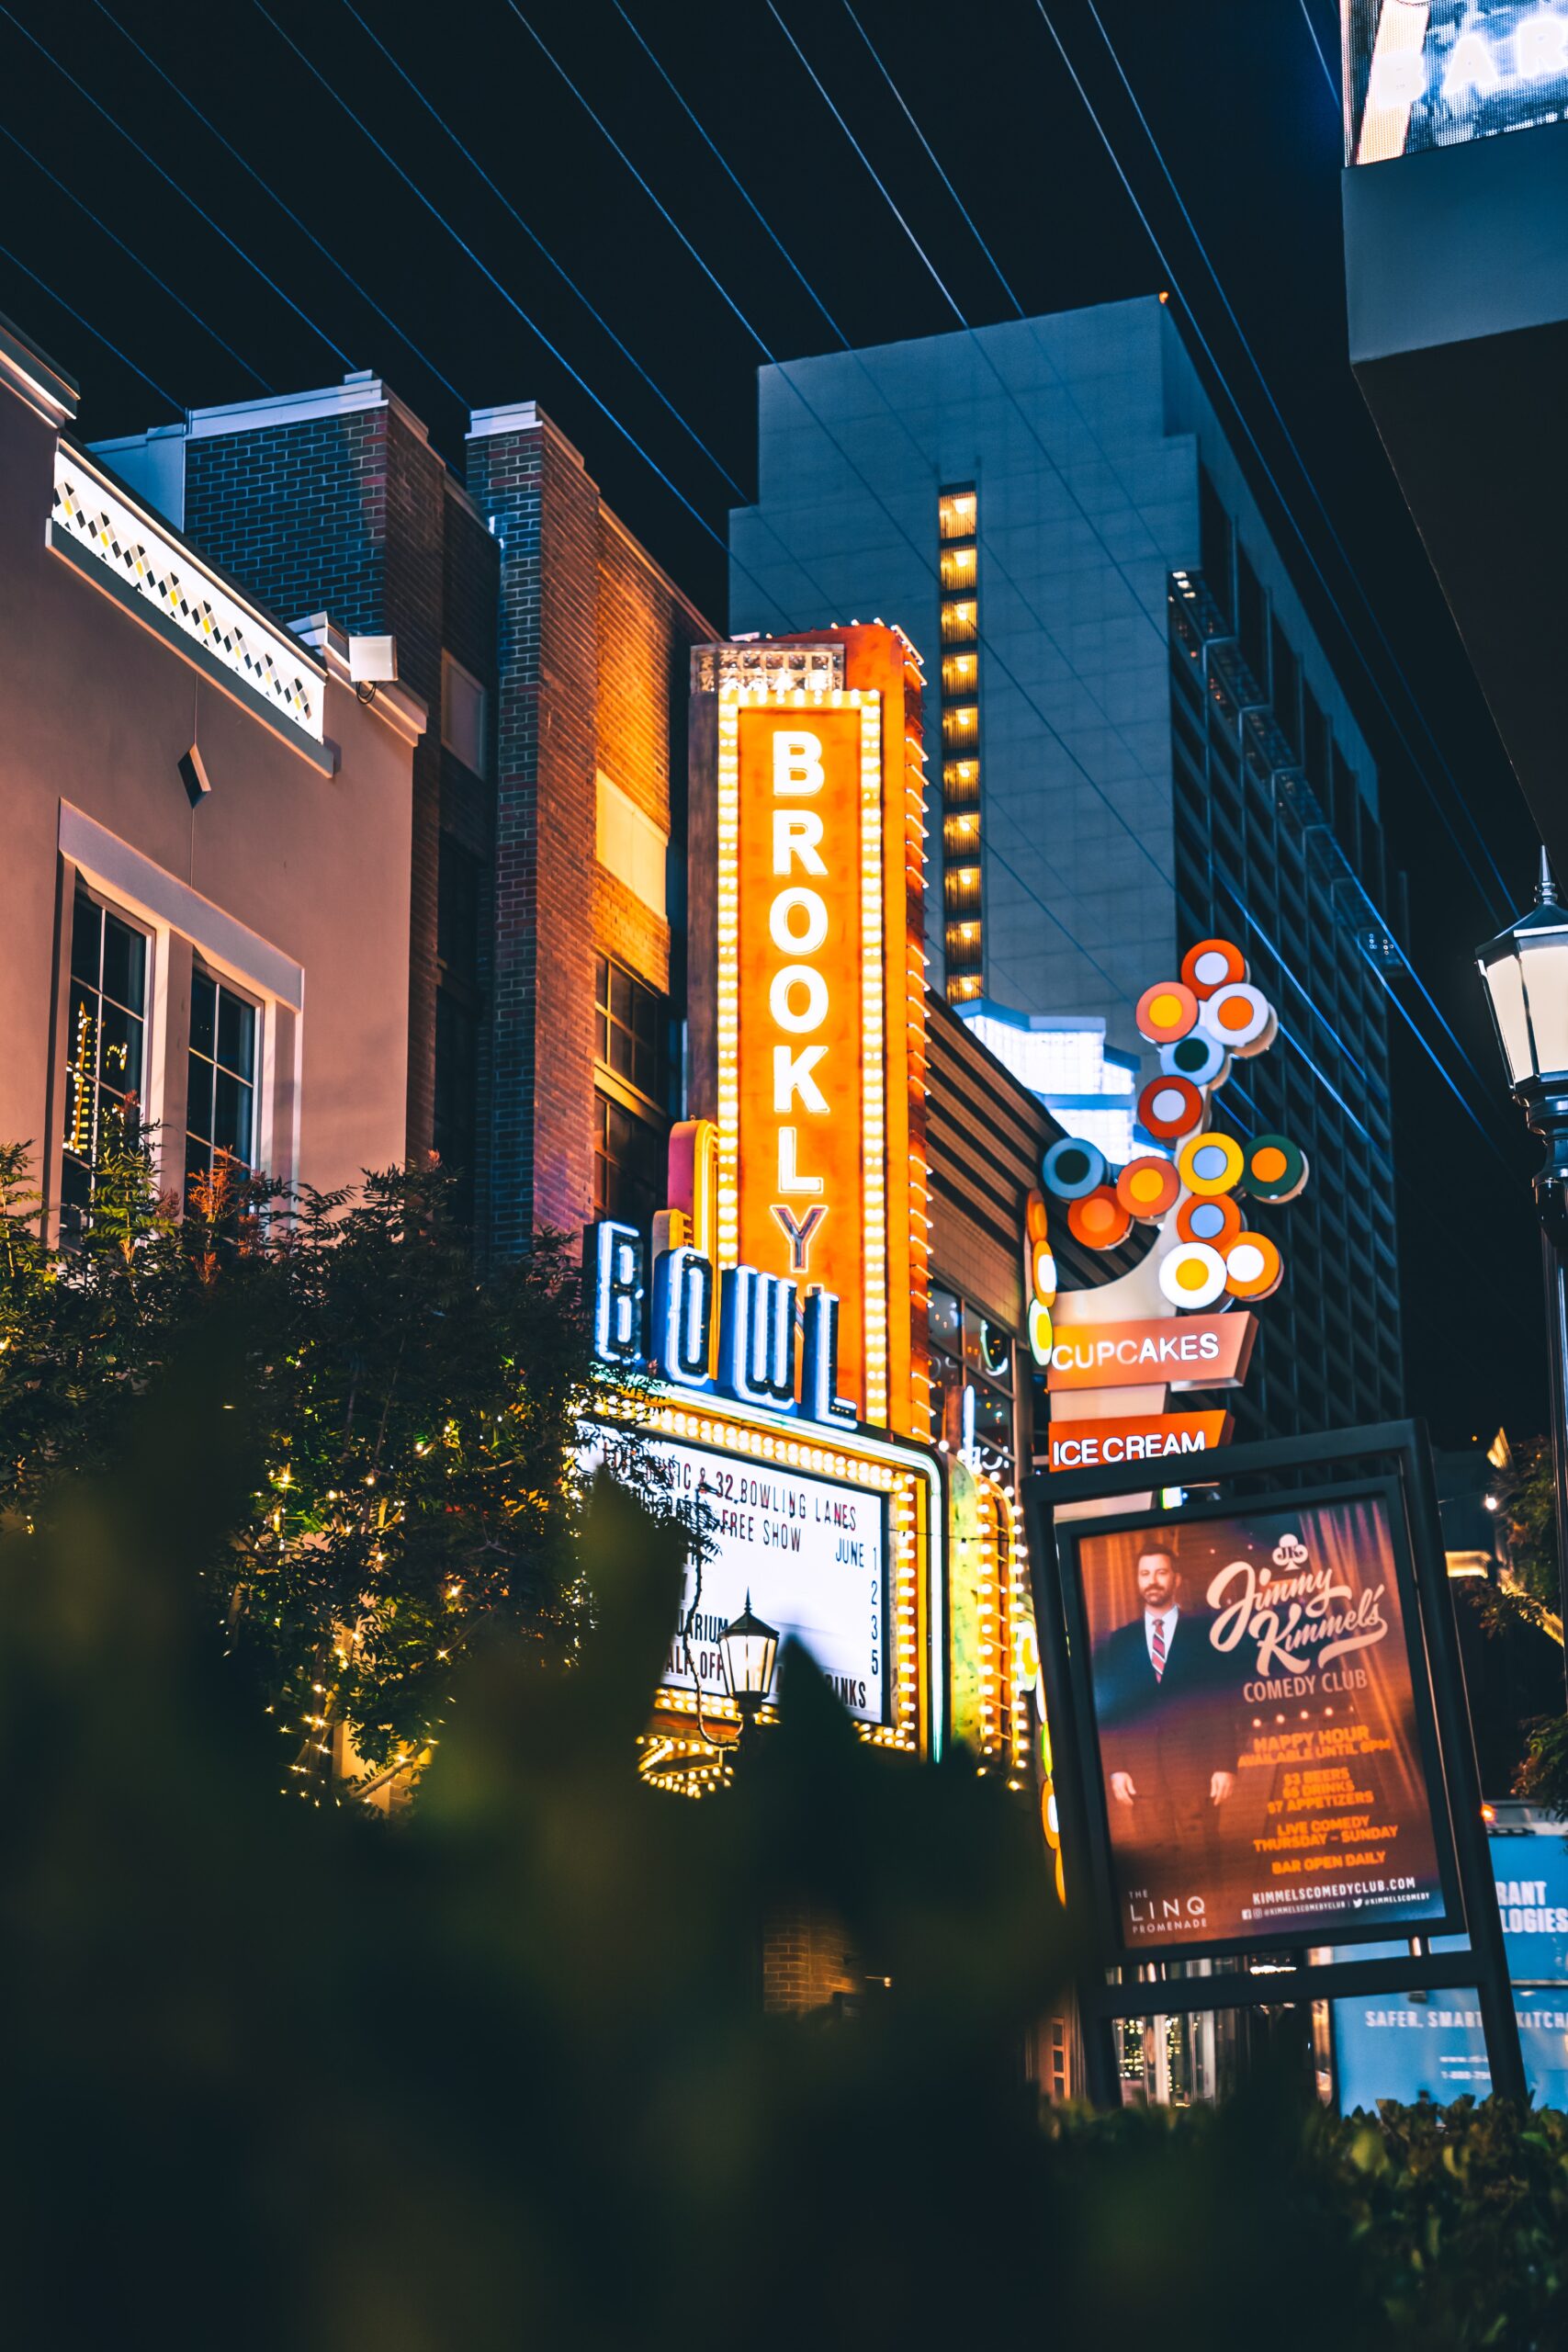 Signage in New York City at night. A lit vertical sign reads BROOKLYN, above a movie theater sign and a colorful sign for an ice cream parlor.